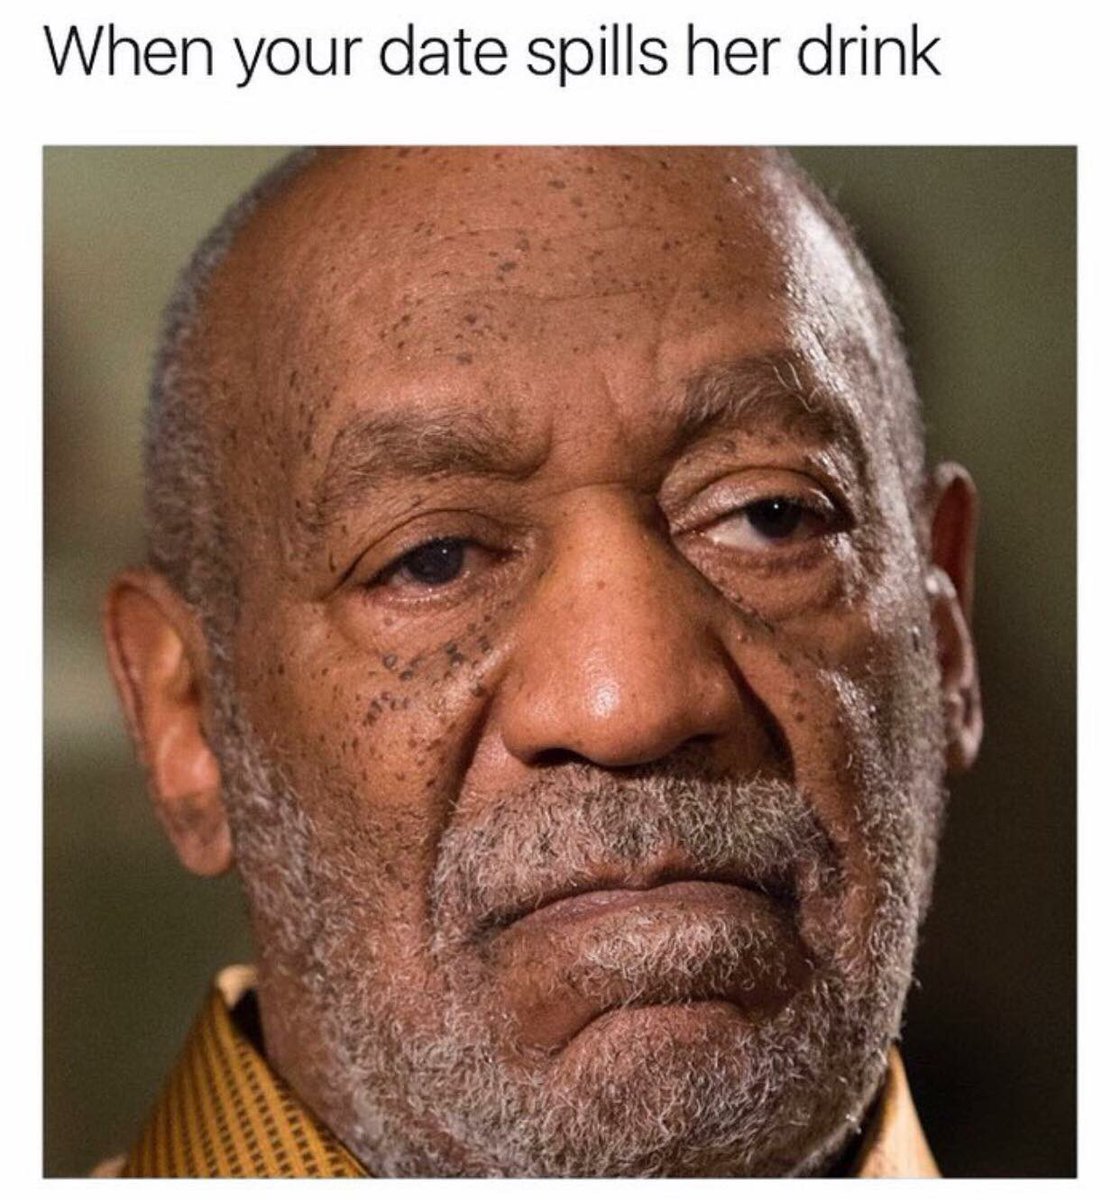 your date spills her drink meme - When your date spills her drink